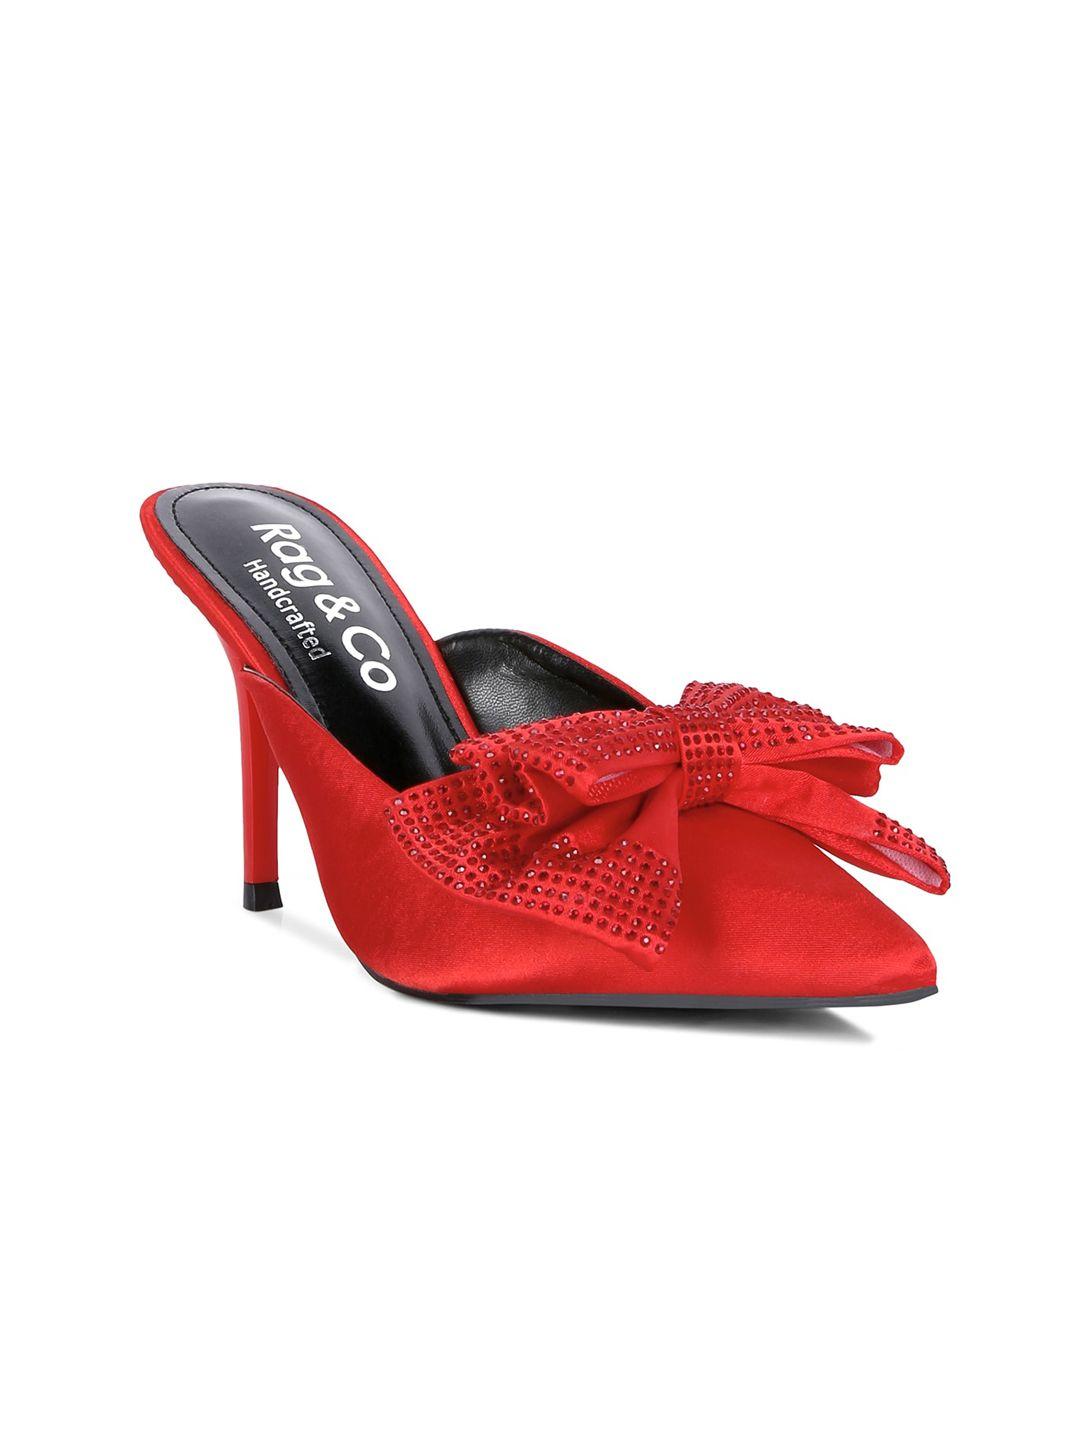 rag & co red party stiletto pumps with bows